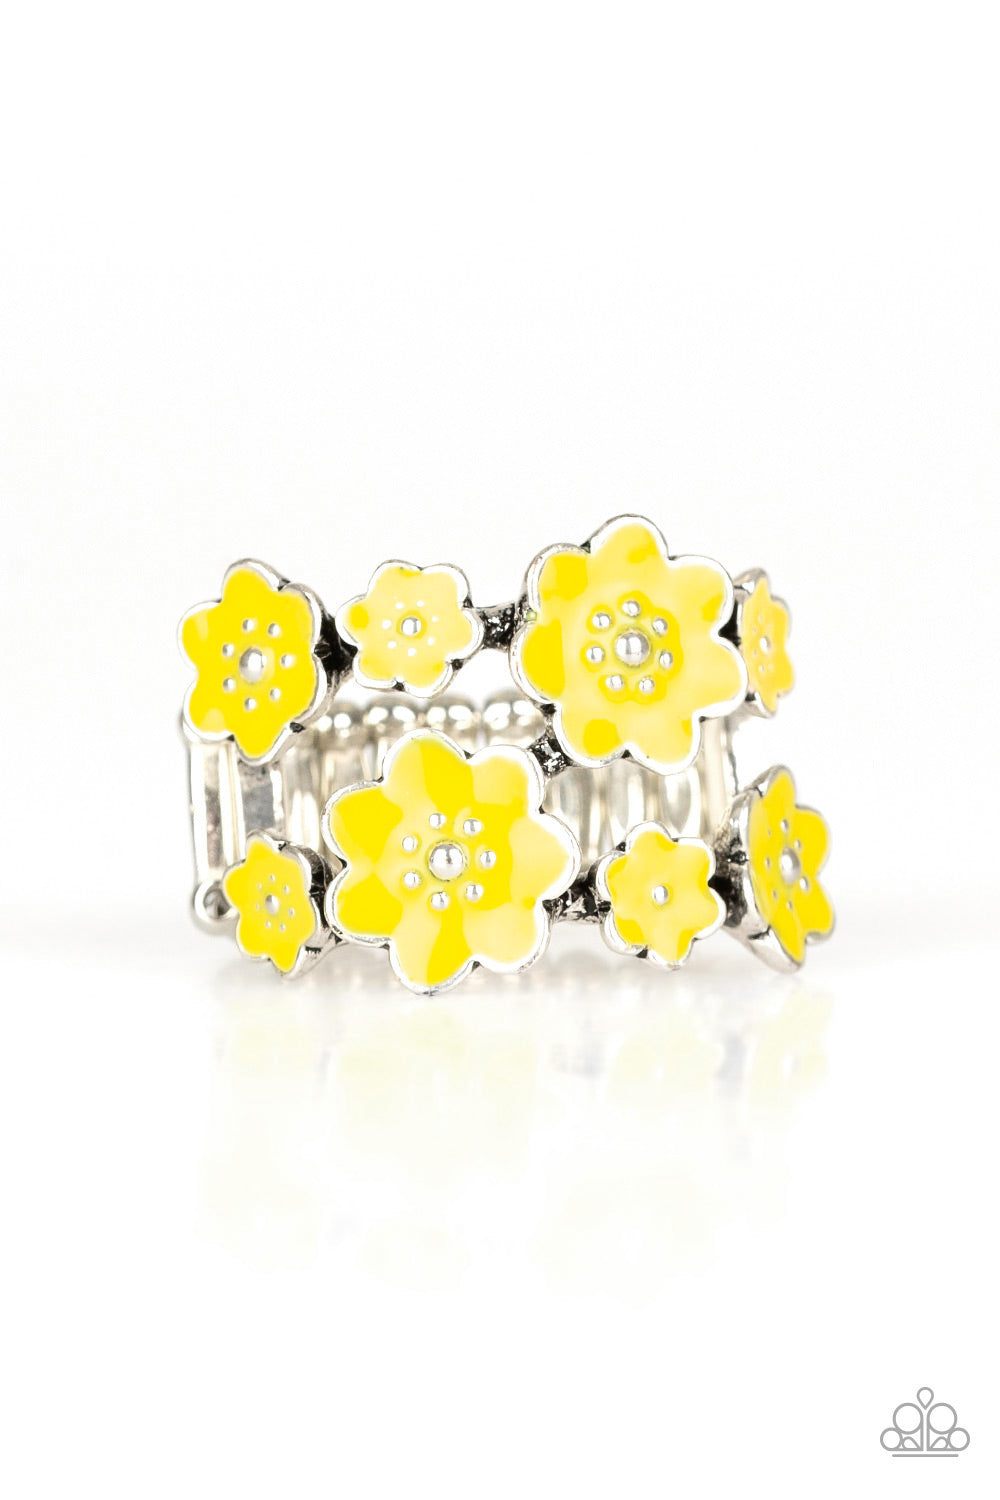 Floral Crowns - Yellow